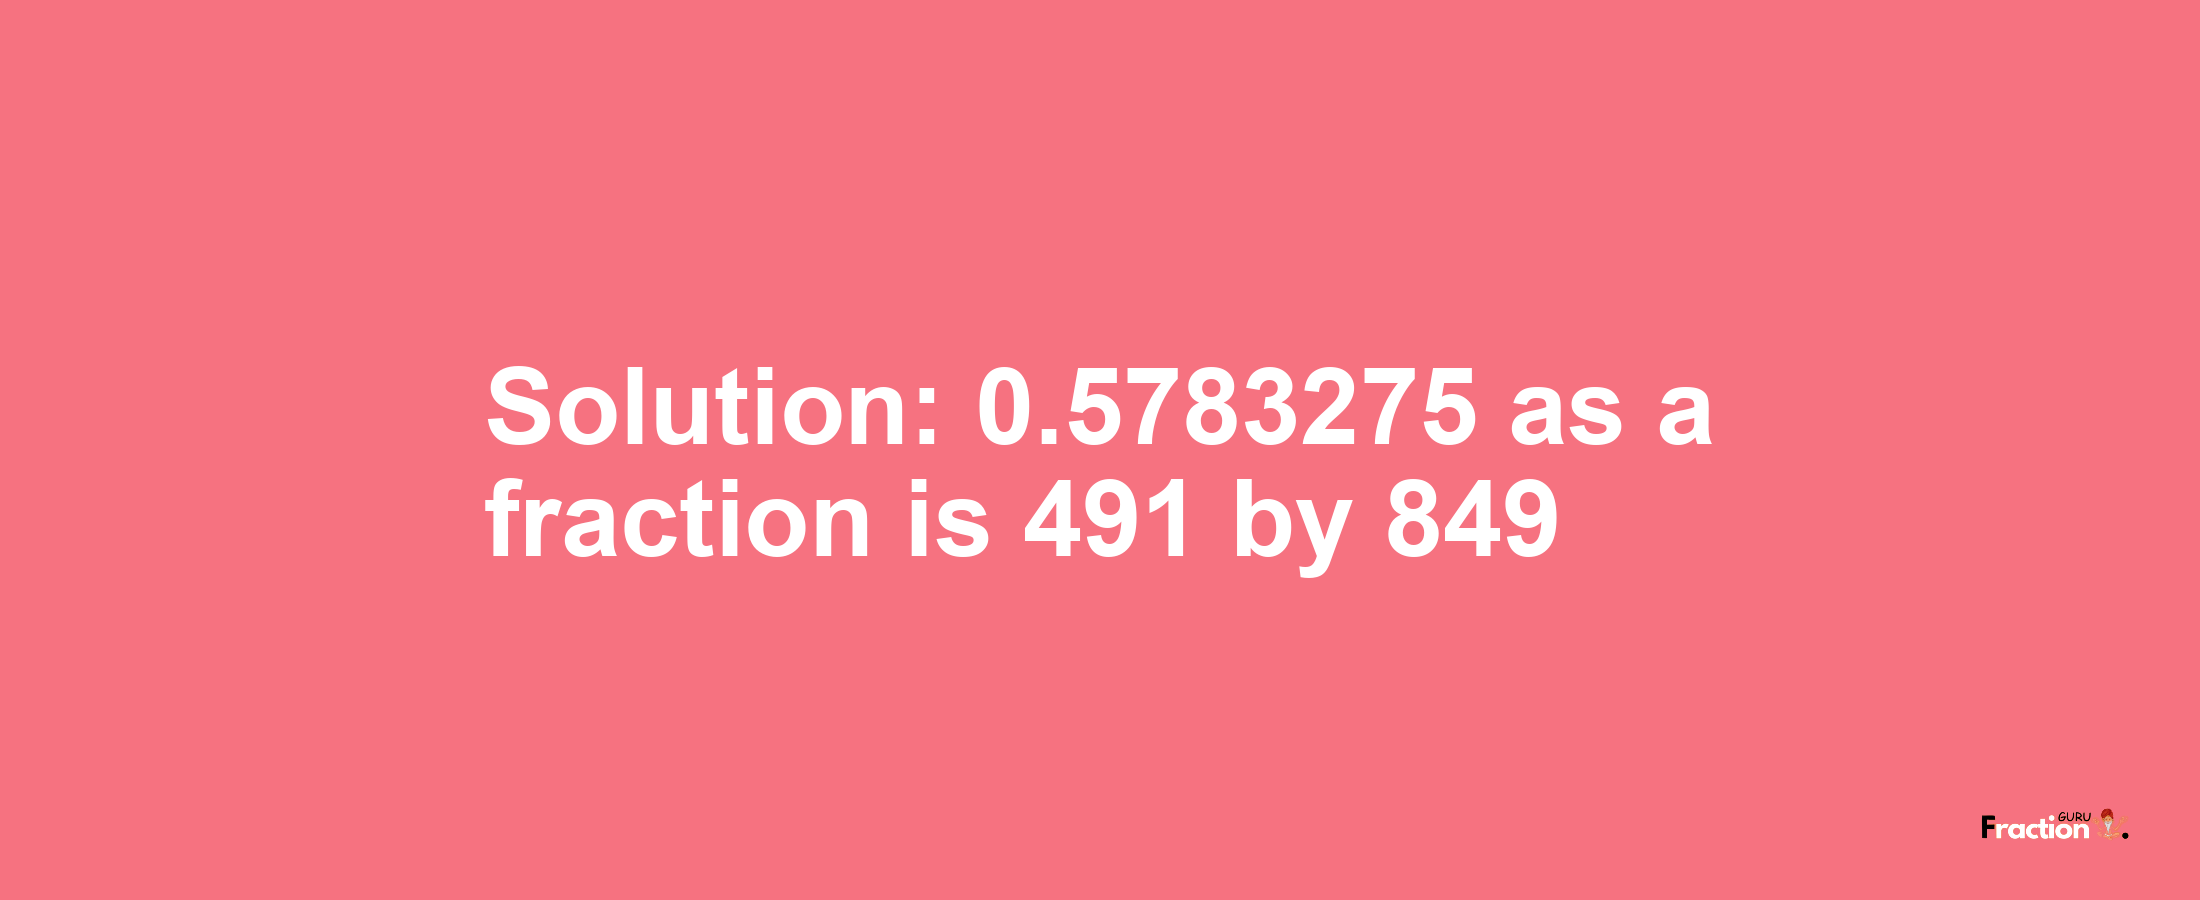 Solution:0.5783275 as a fraction is 491/849